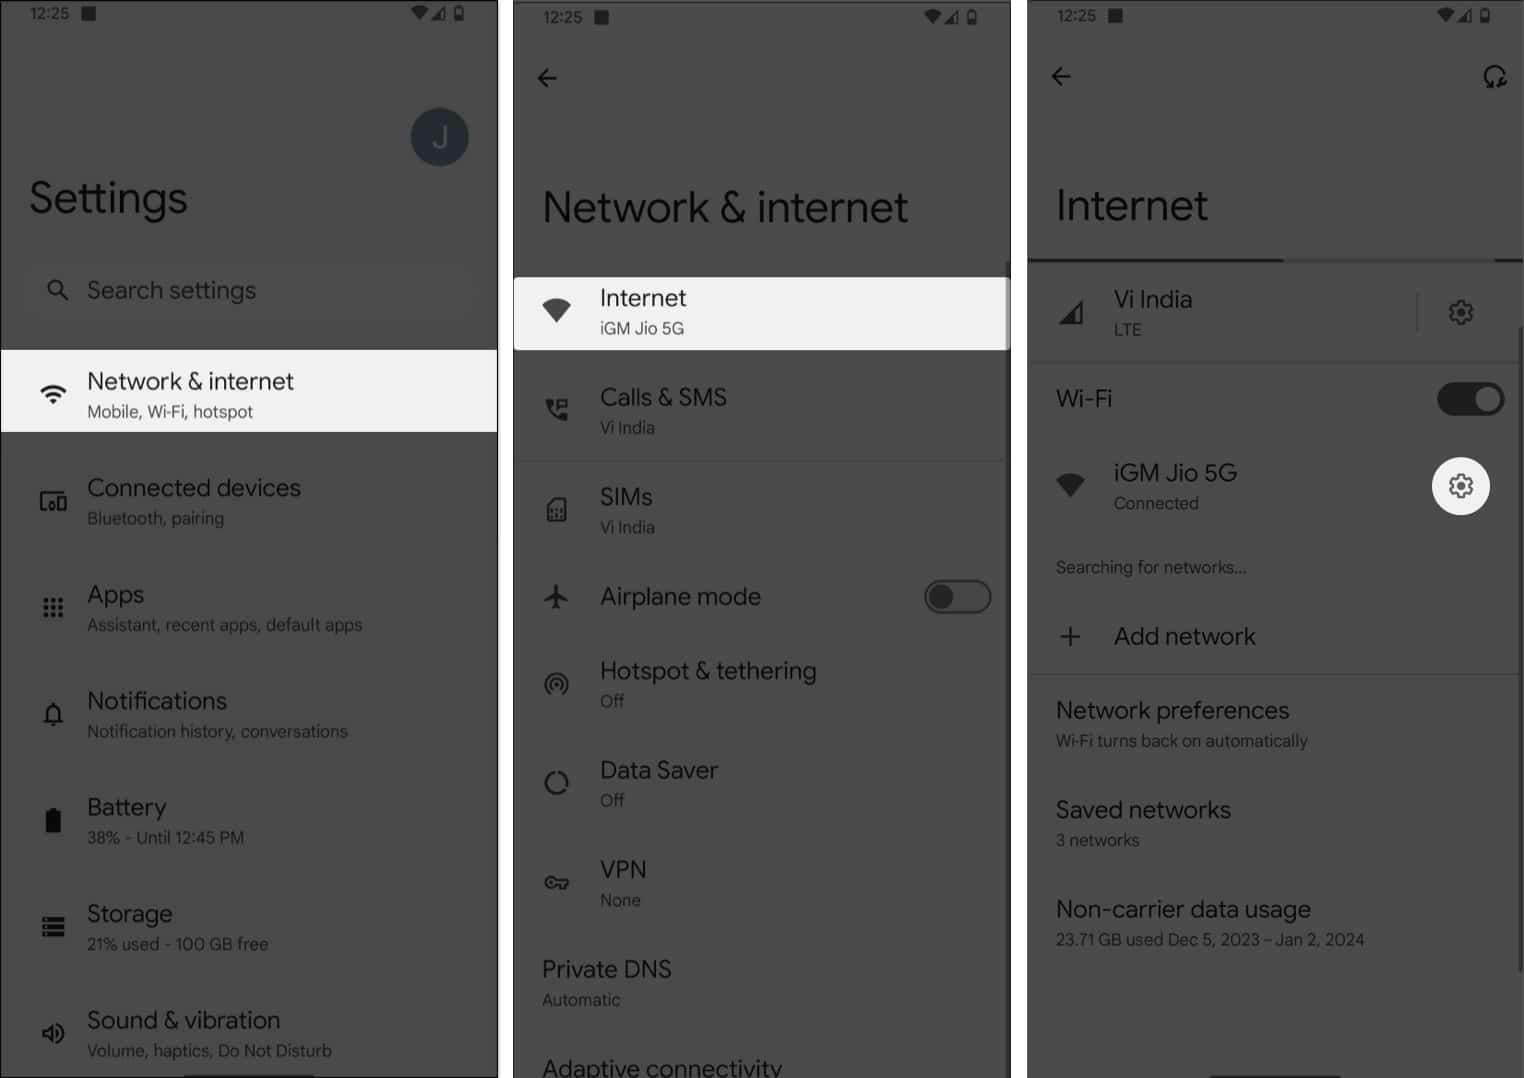 Network and internet, internet, setting icon next to connected Wi-Fi